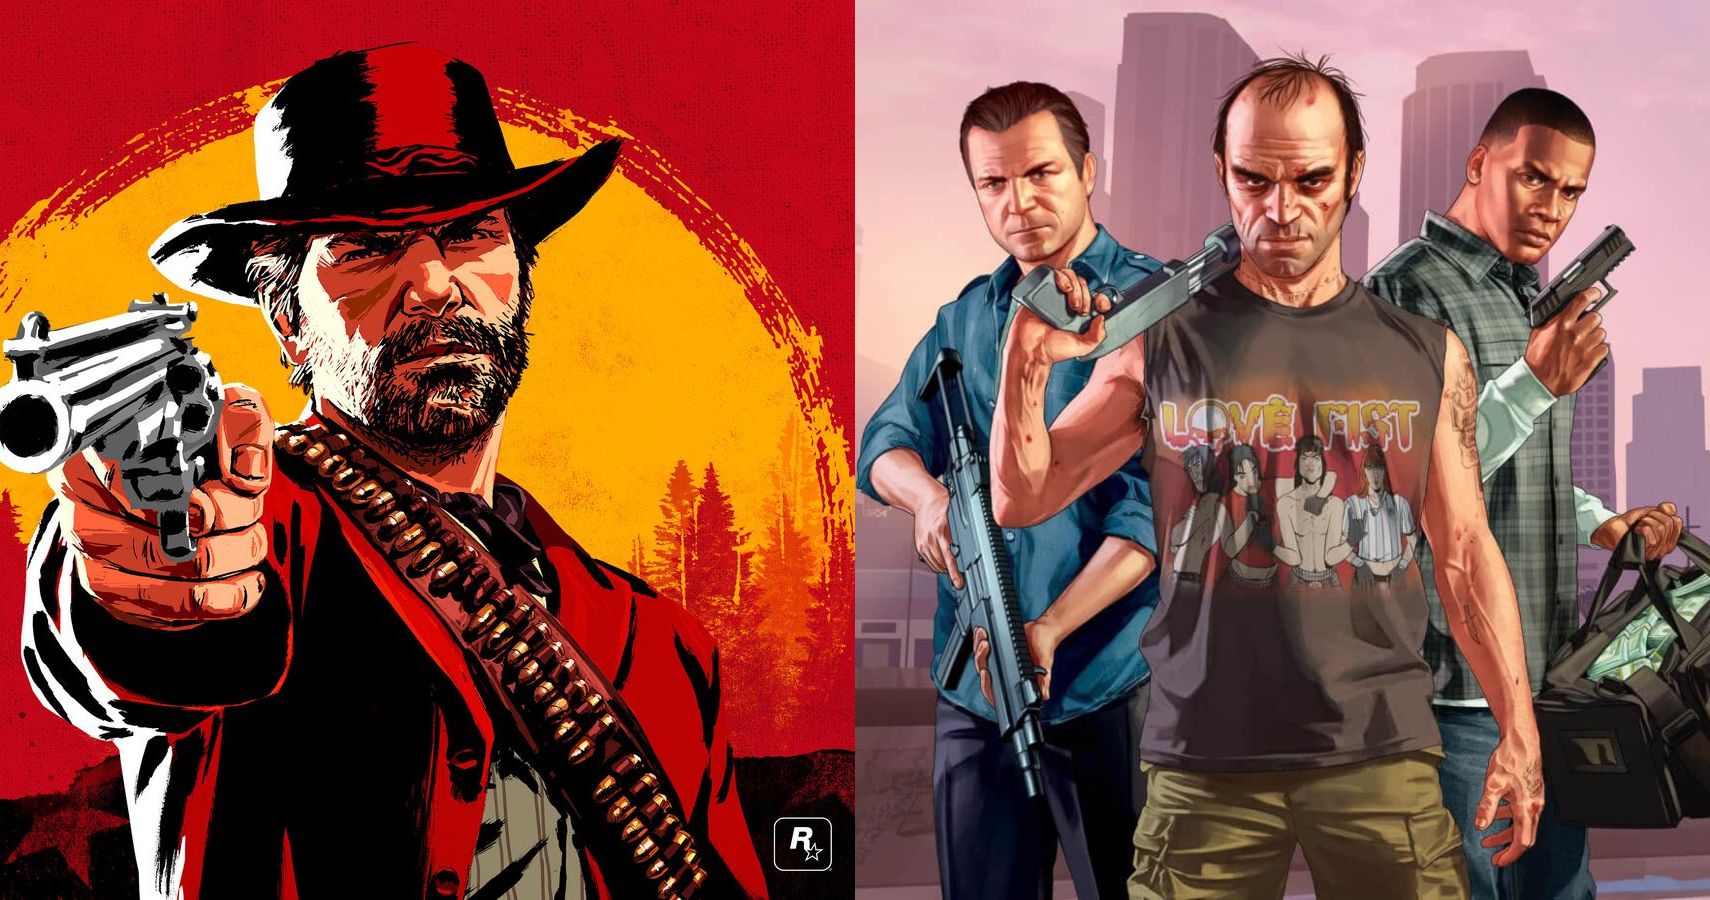 Grand Theft Auto V 5 Reasons It’s Rockstar’s Best Game (& 5 Reason’s It’s Red Dead Redemption II)